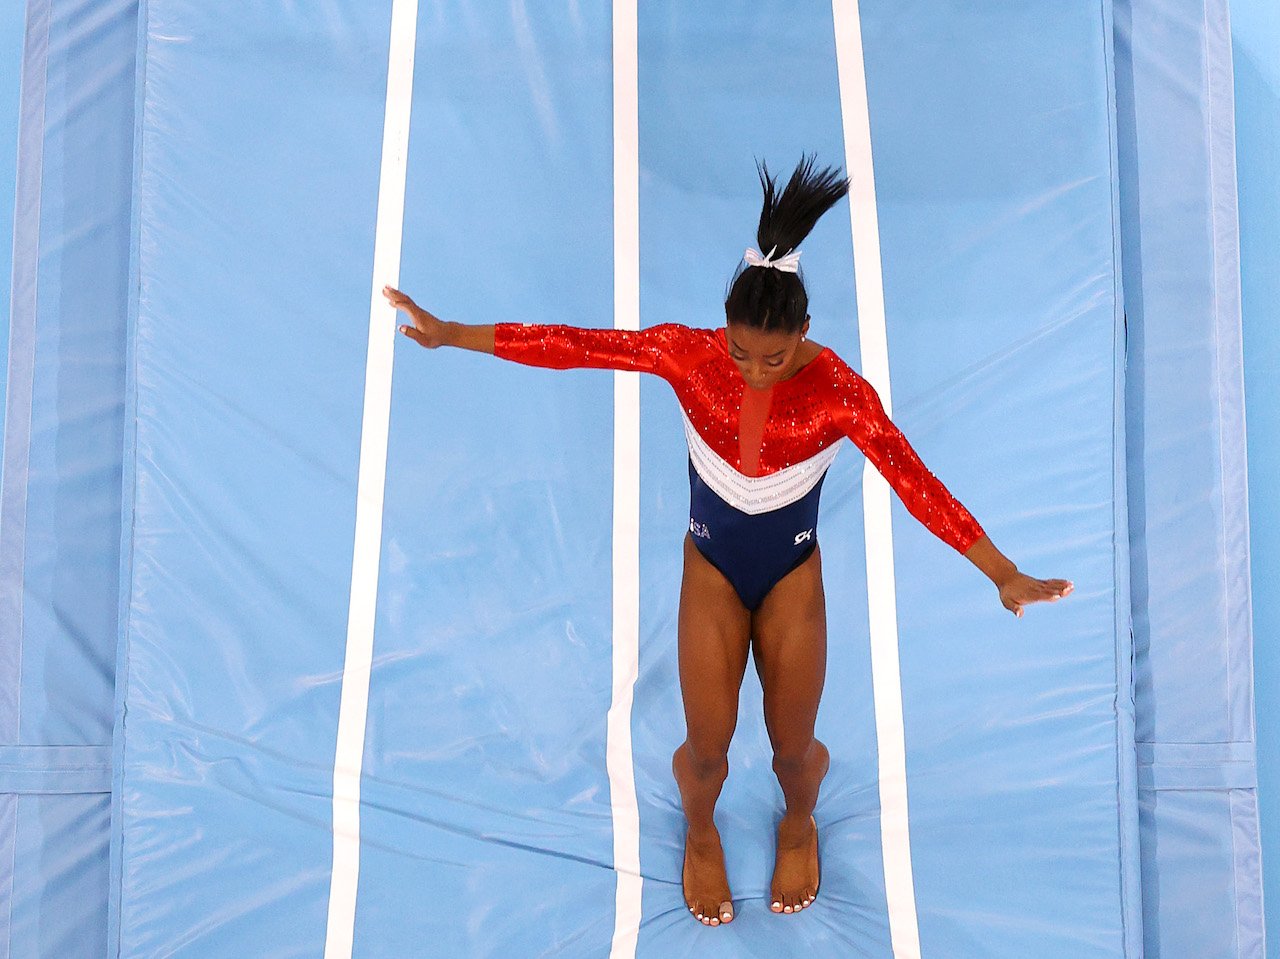 A photo of Simon Biles regaining her balance after a competition at the Tokyo Games. 